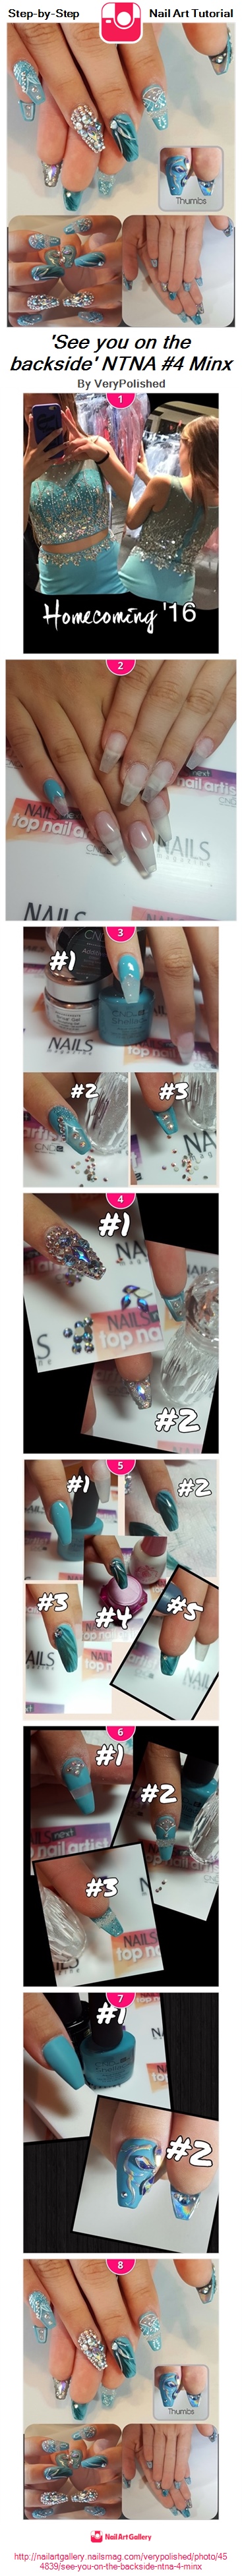 'See you on the backside' NTNA #4 Minx - Nail Art Gallery